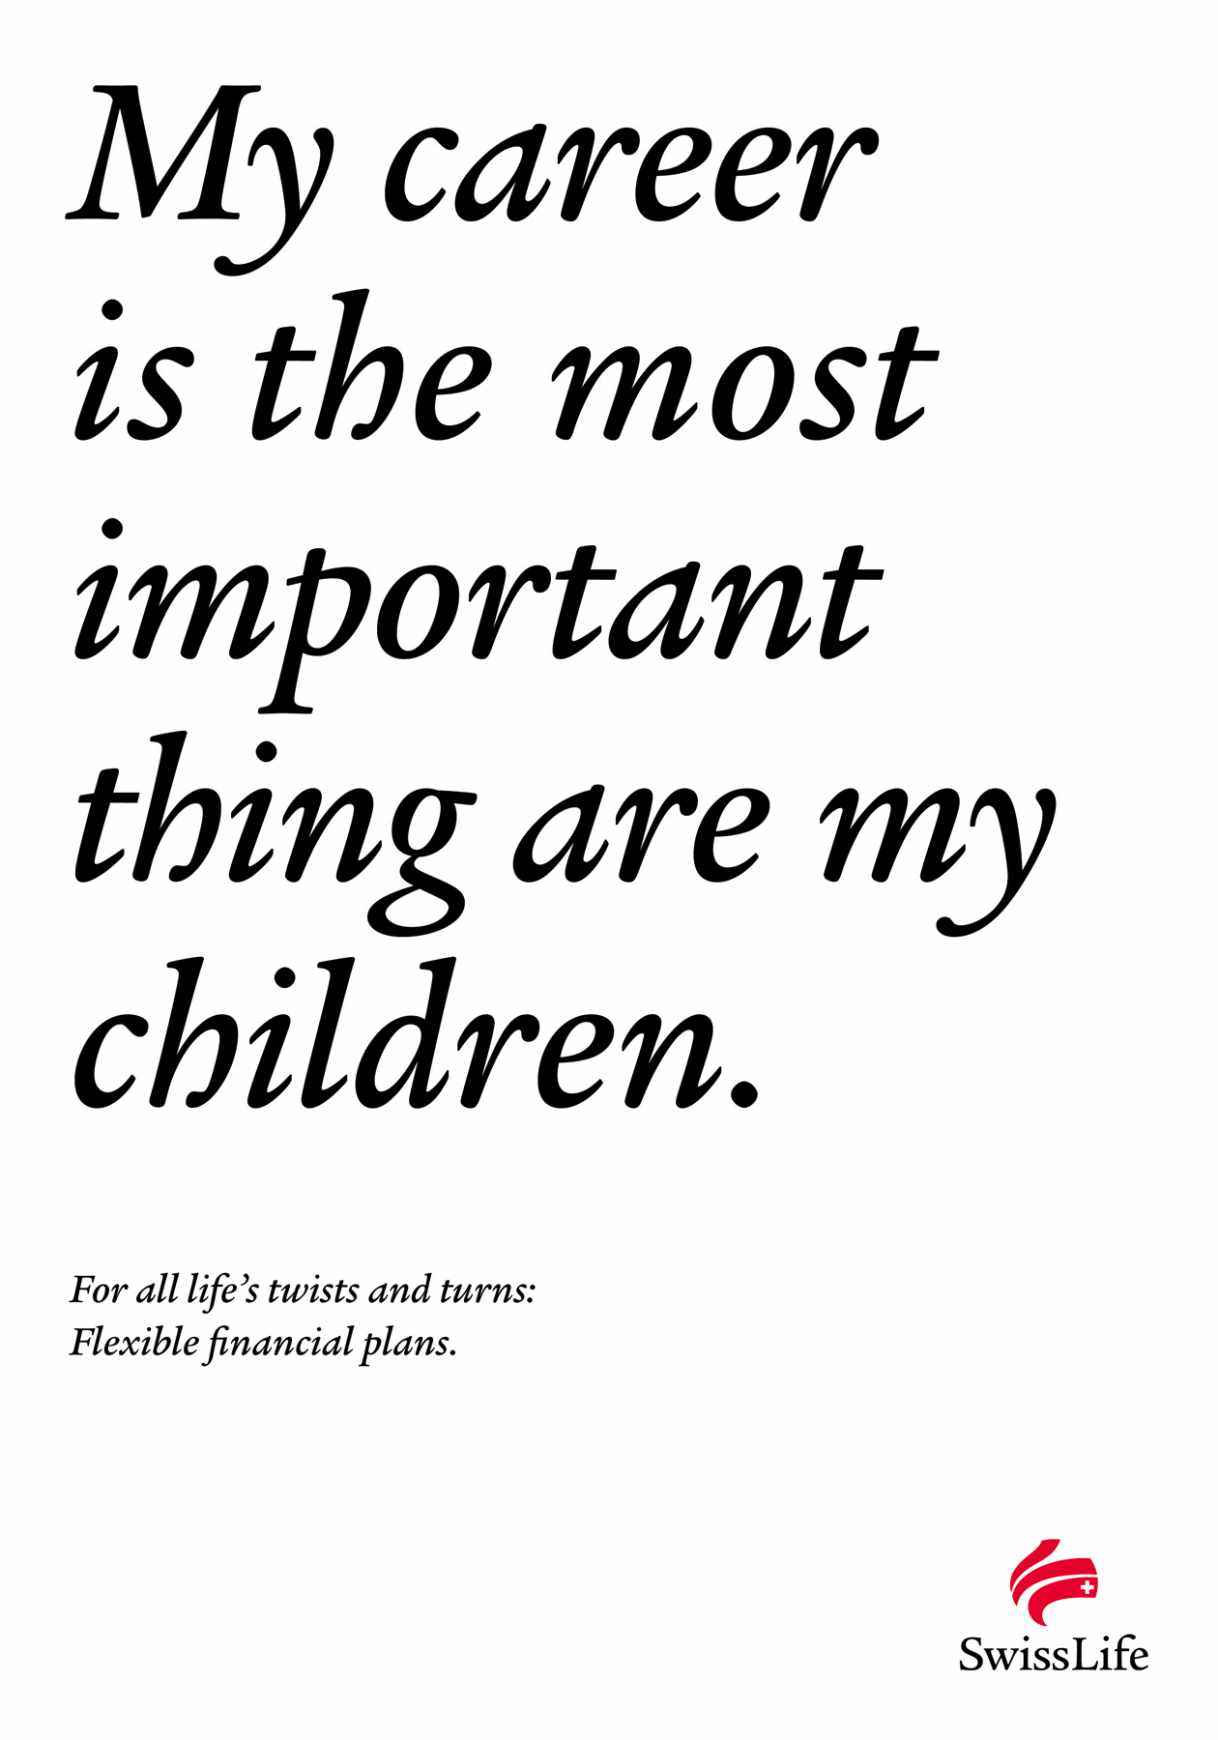 swiss-life-life-insurance-lifes-turns-in-a-sentence-2-2-of-6-most-important-thing-leo-burnett-schweiz-ag-zurich